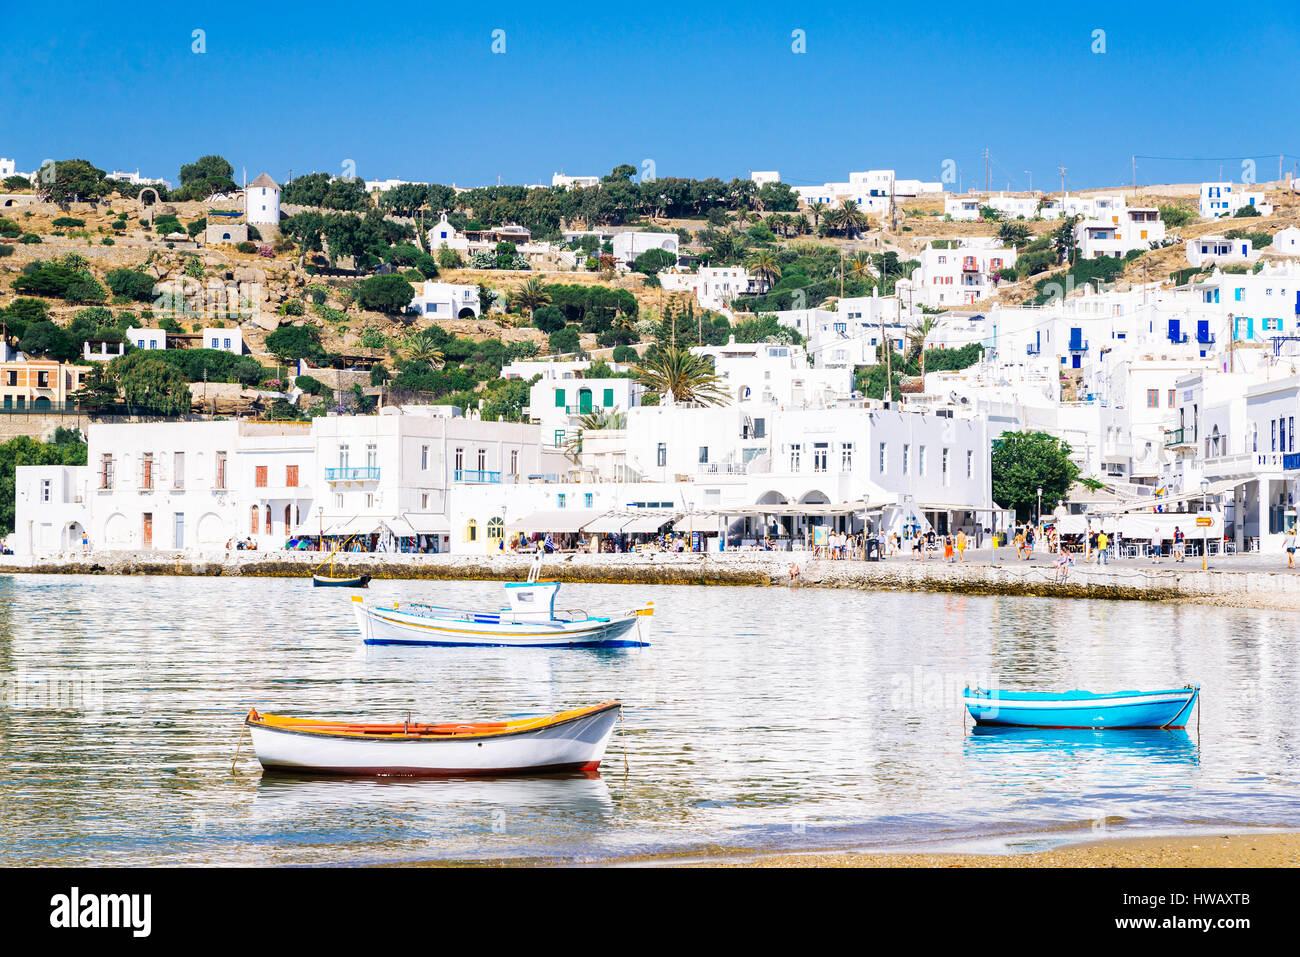 Mykonos harbor and reflections of the whitewashed town in the aegean sea, Mykonos island, Cyclades, Greece Stock Photo